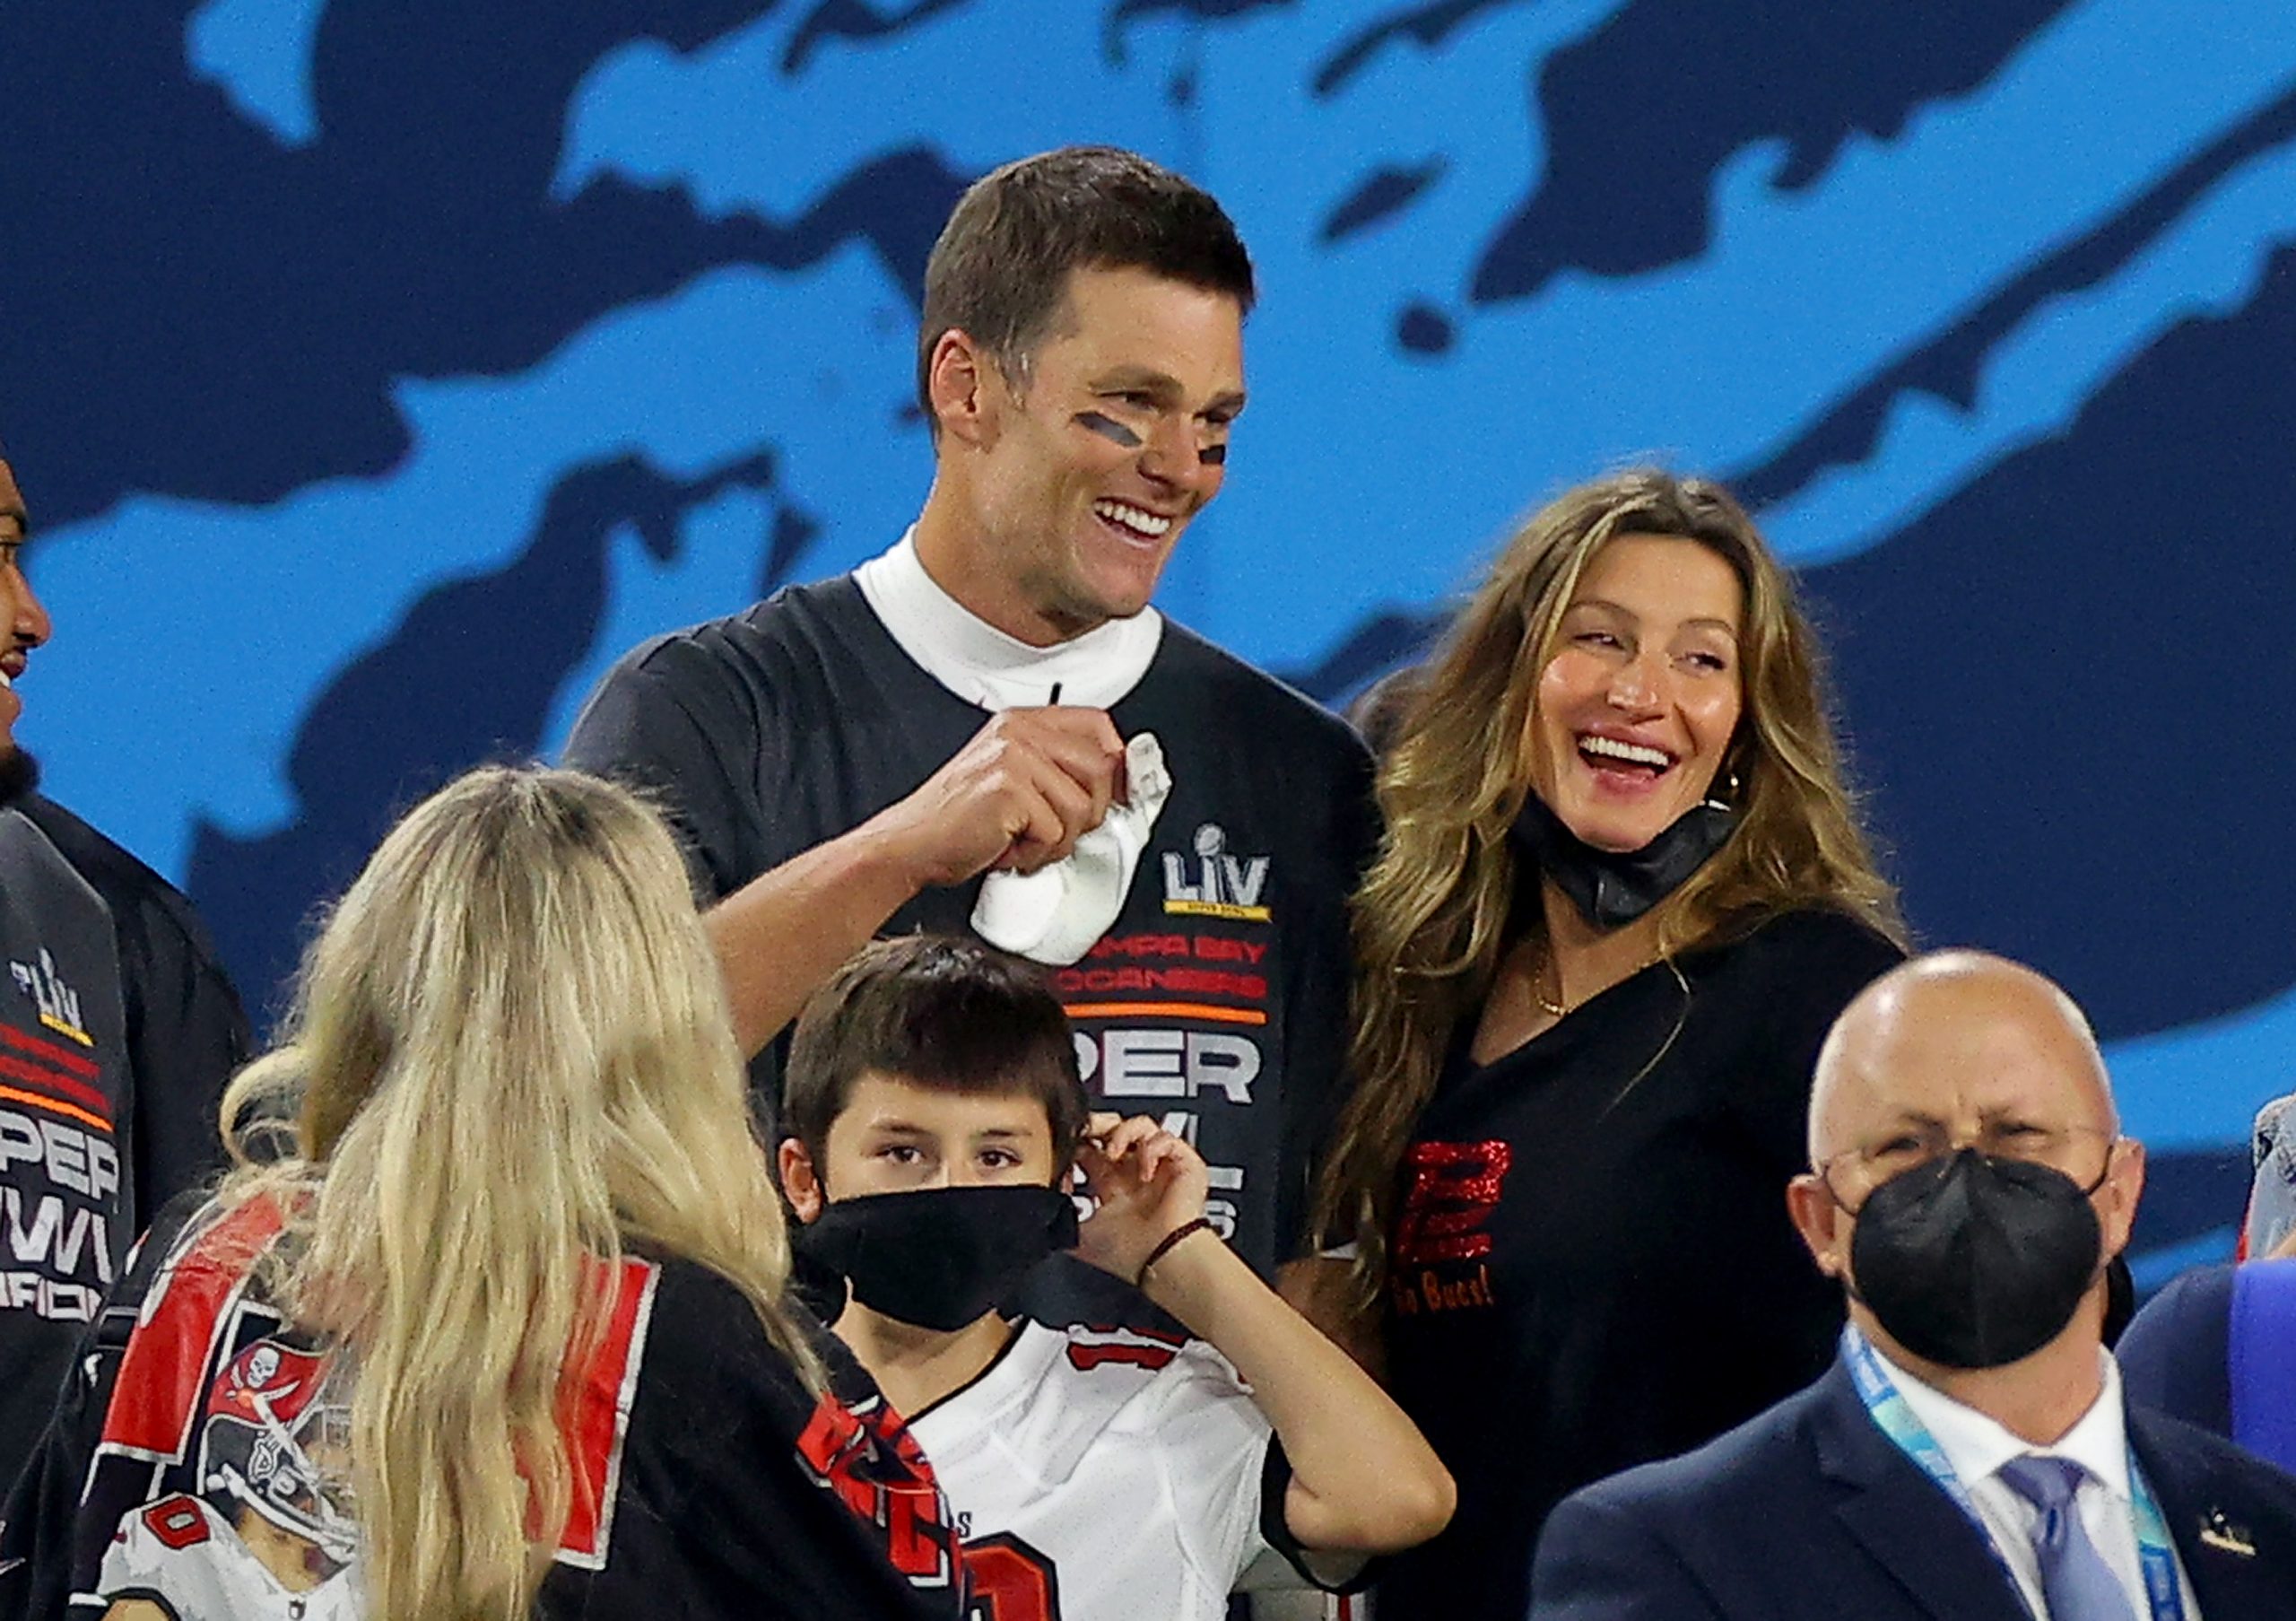 Tom Brady and Gisele Bündchen: Who Has the Higher Net Worth in 2021?